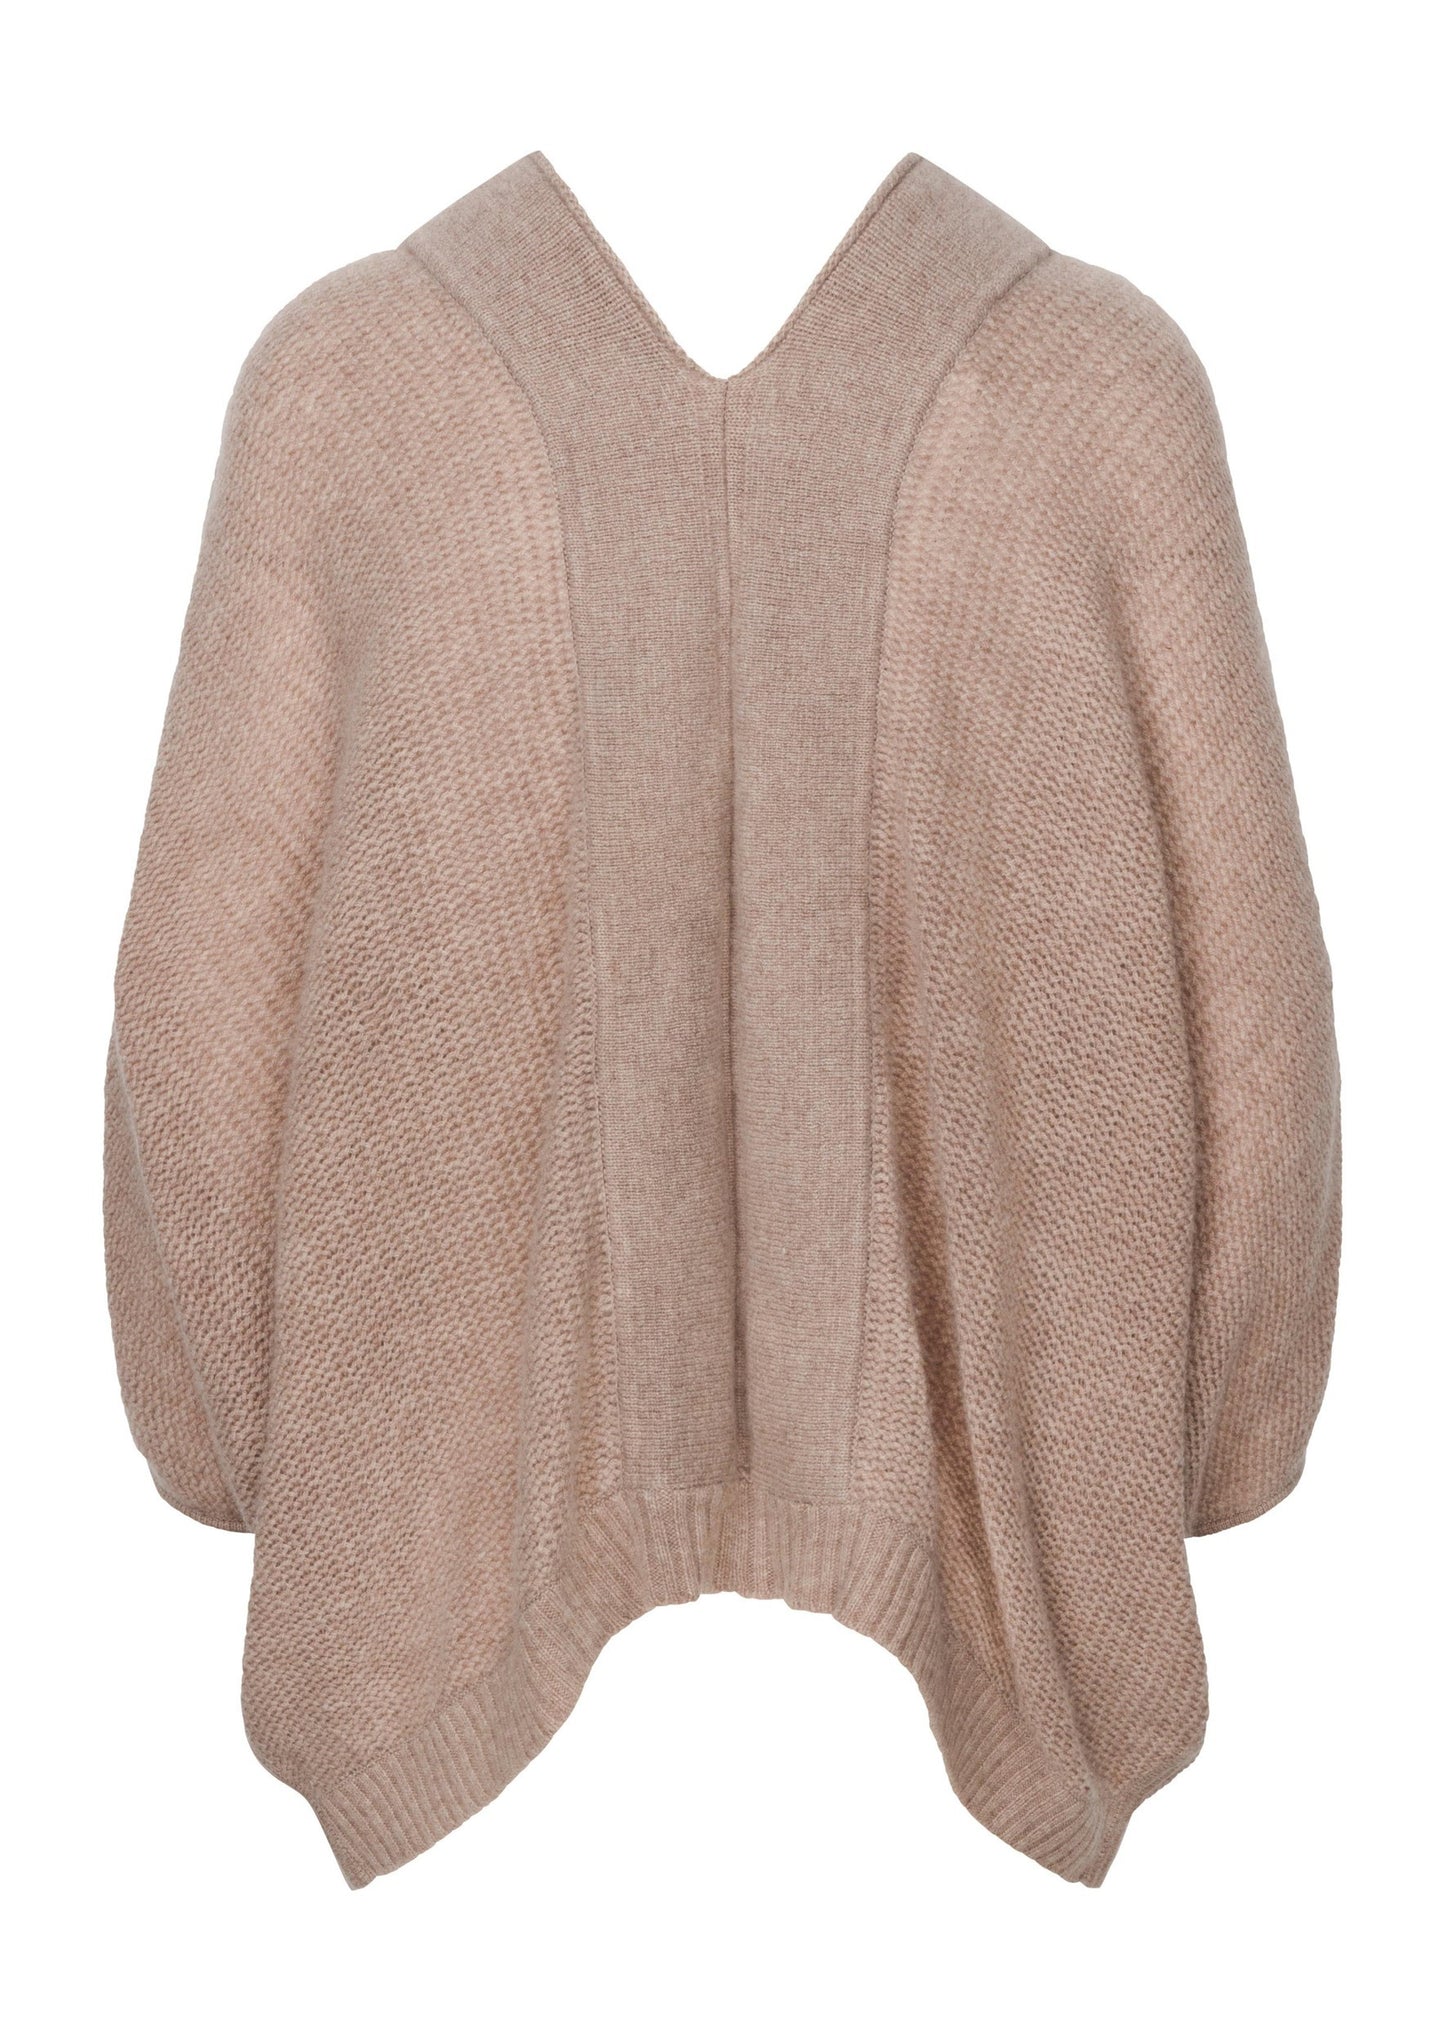 100% Cashmere Three Quarter Length Batwing Sleeves, Open Cardigan